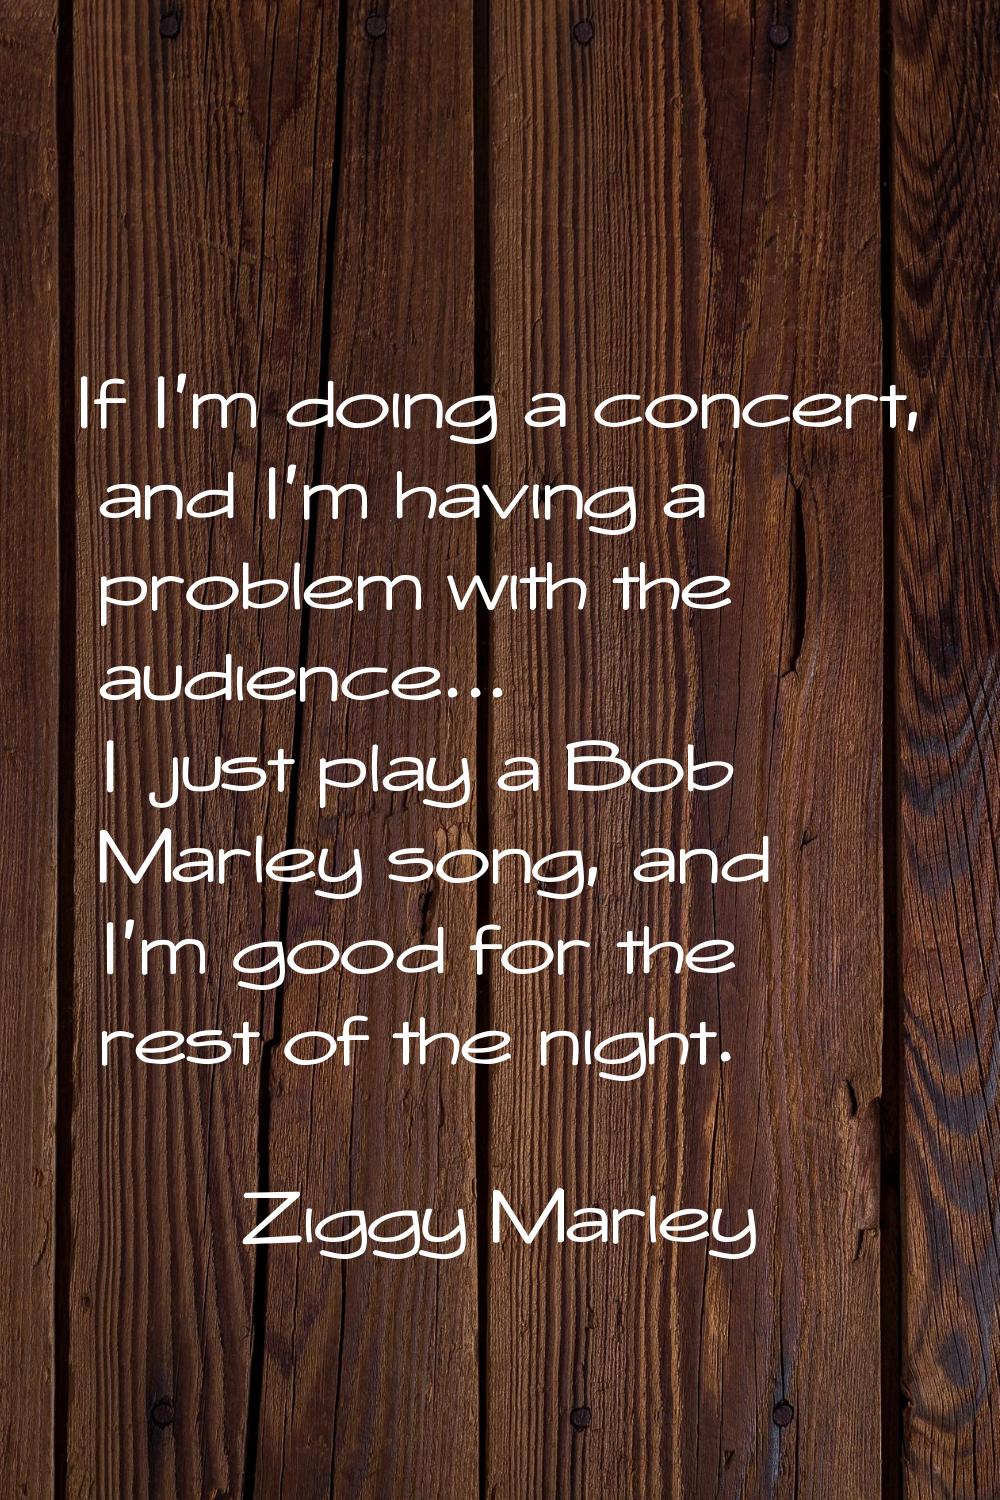 If I'm doing a concert, and I'm having a problem with the audience... I just play a Bob Marley song